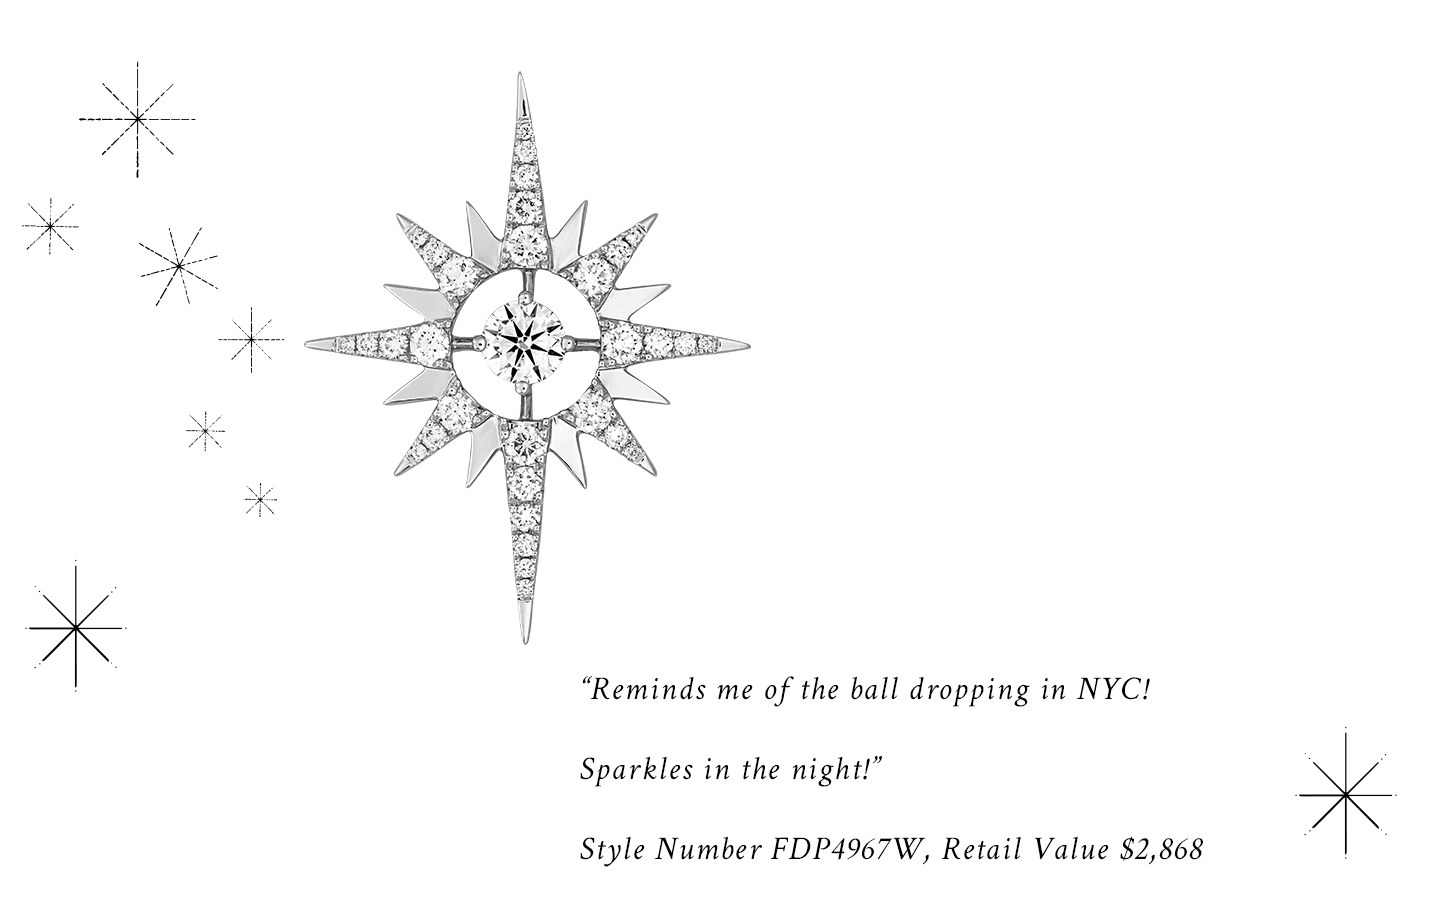 "Reminds me of the ball dropping in NYC! Sparkles in the night!" Style Number FDP4967W, Retail Value $2,868